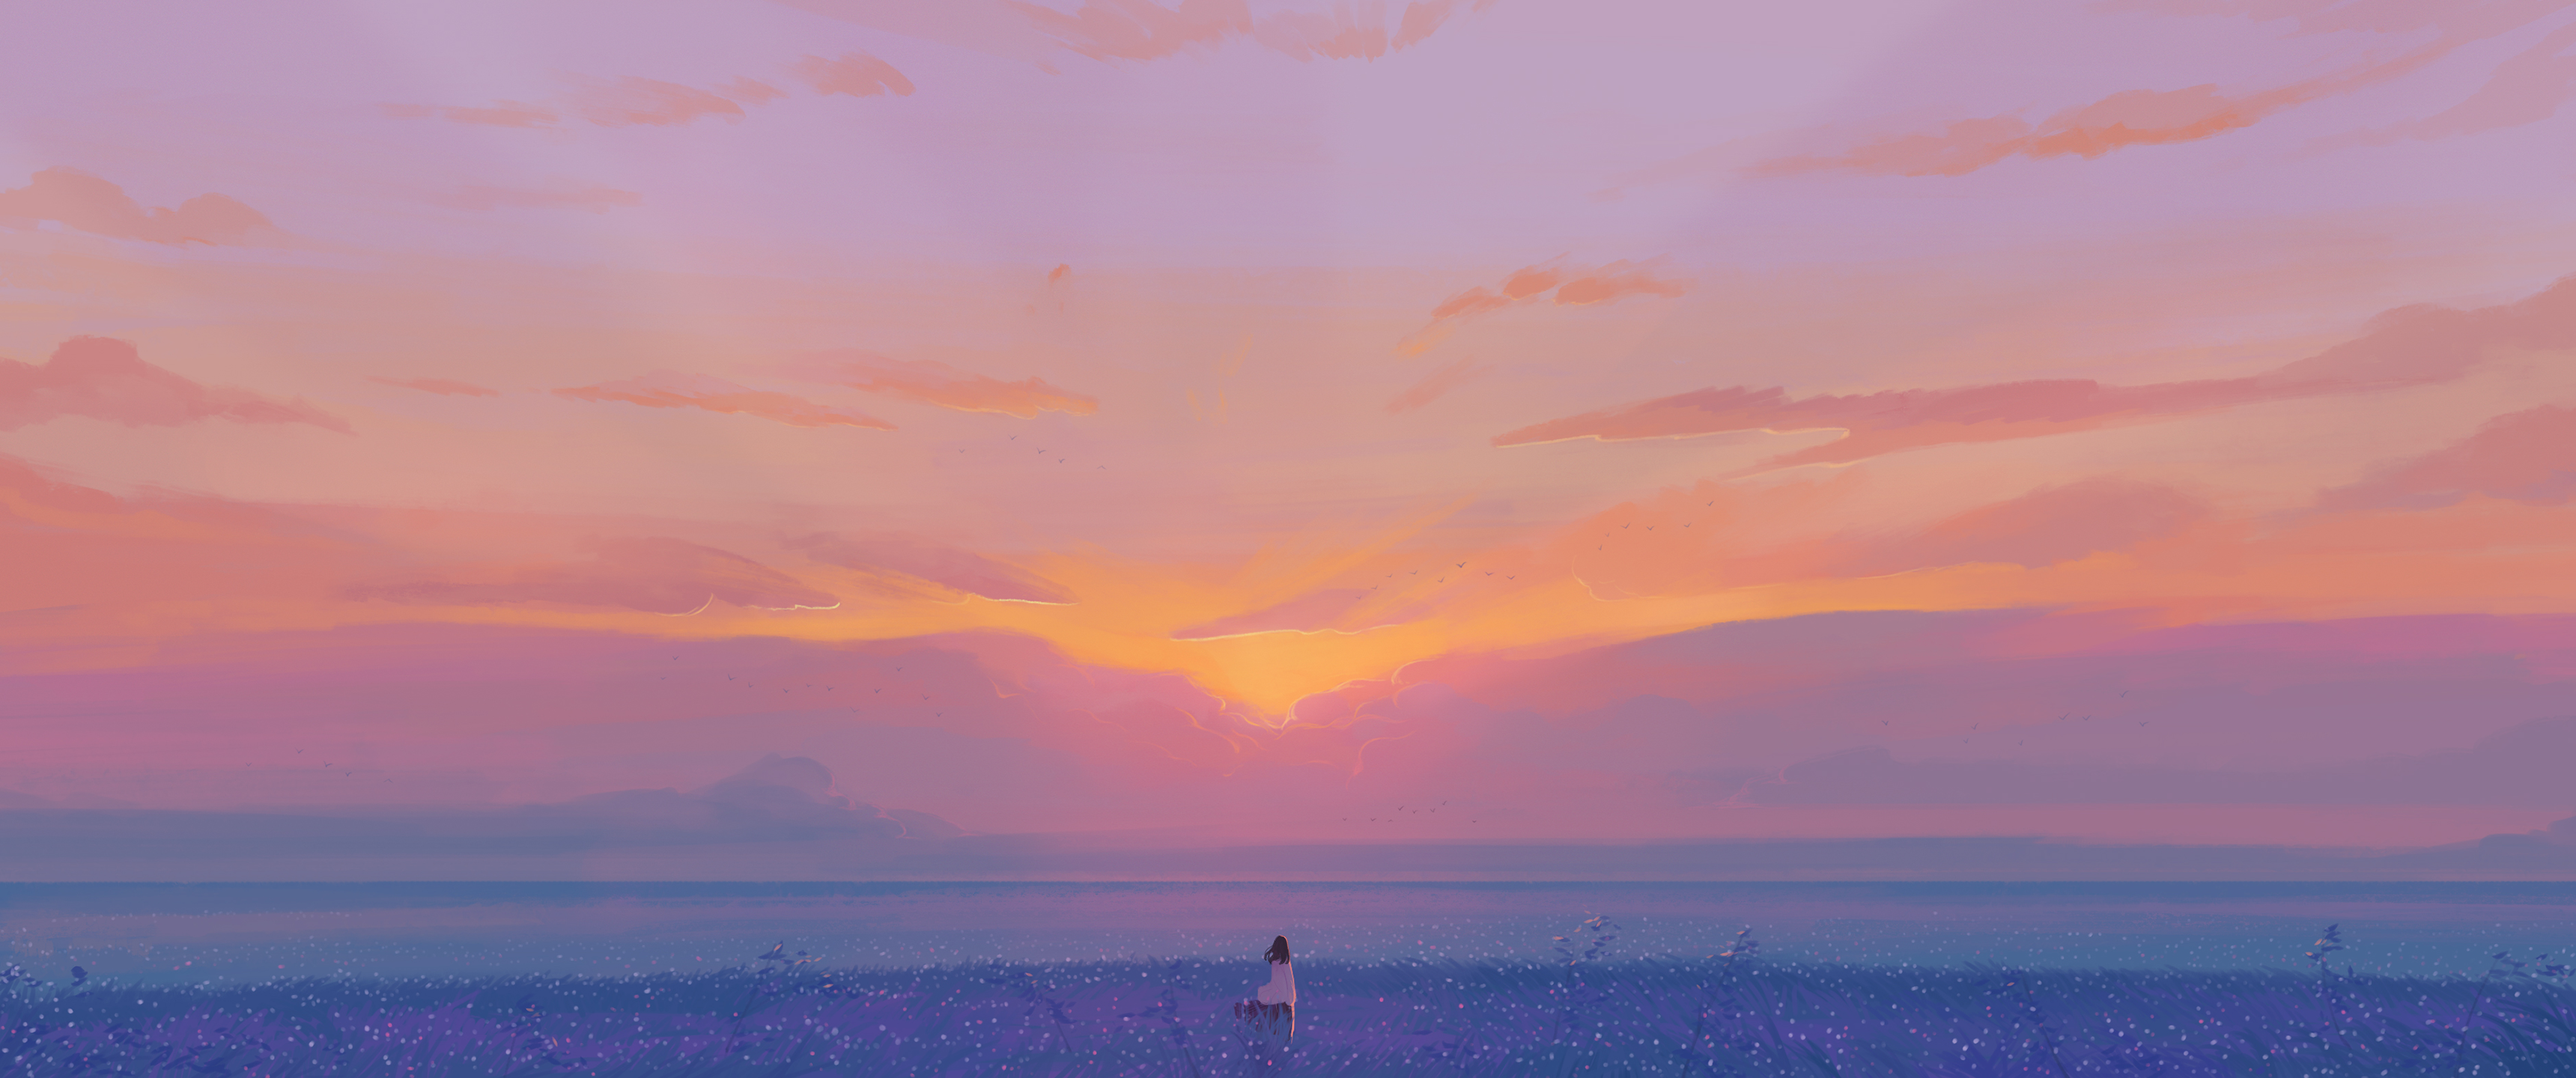 Anime 3440x1440 landscape clouds sky standing field sunset sunset glow anime girls looking away looking into the distance anime skirt wind leaves women outdoors outdoors